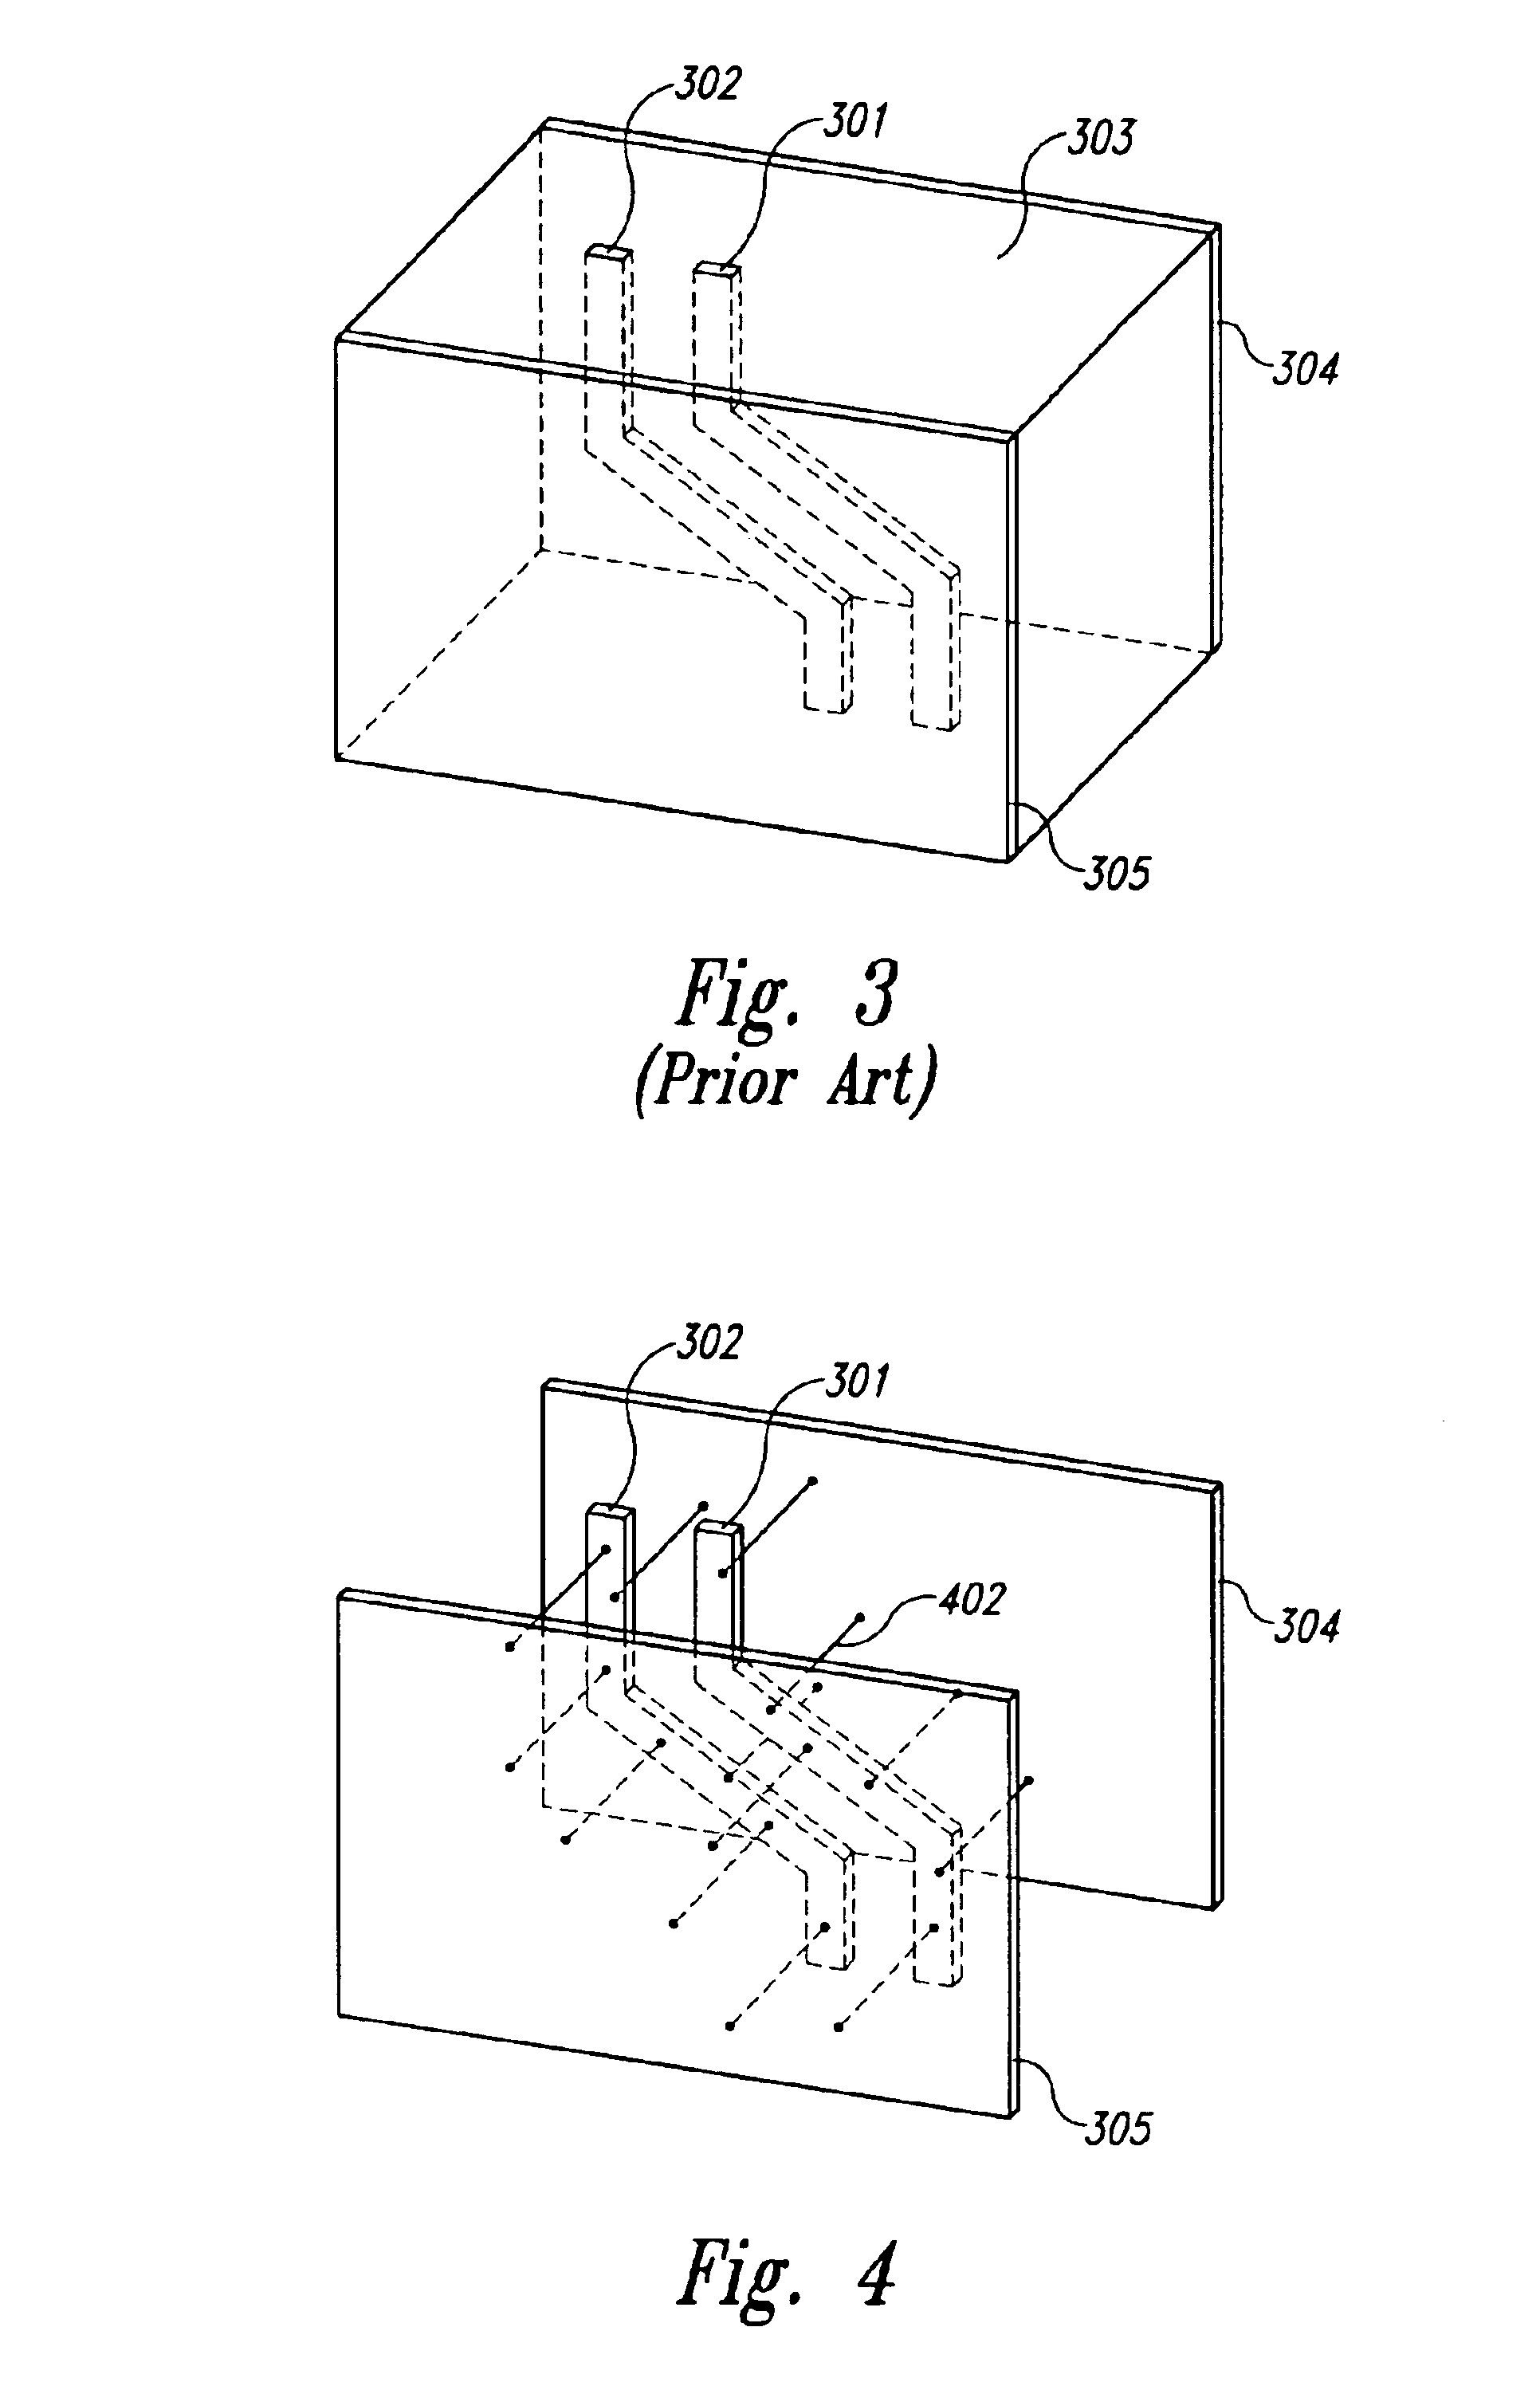 Method for fabricating a filament affixed trace within an electronic device